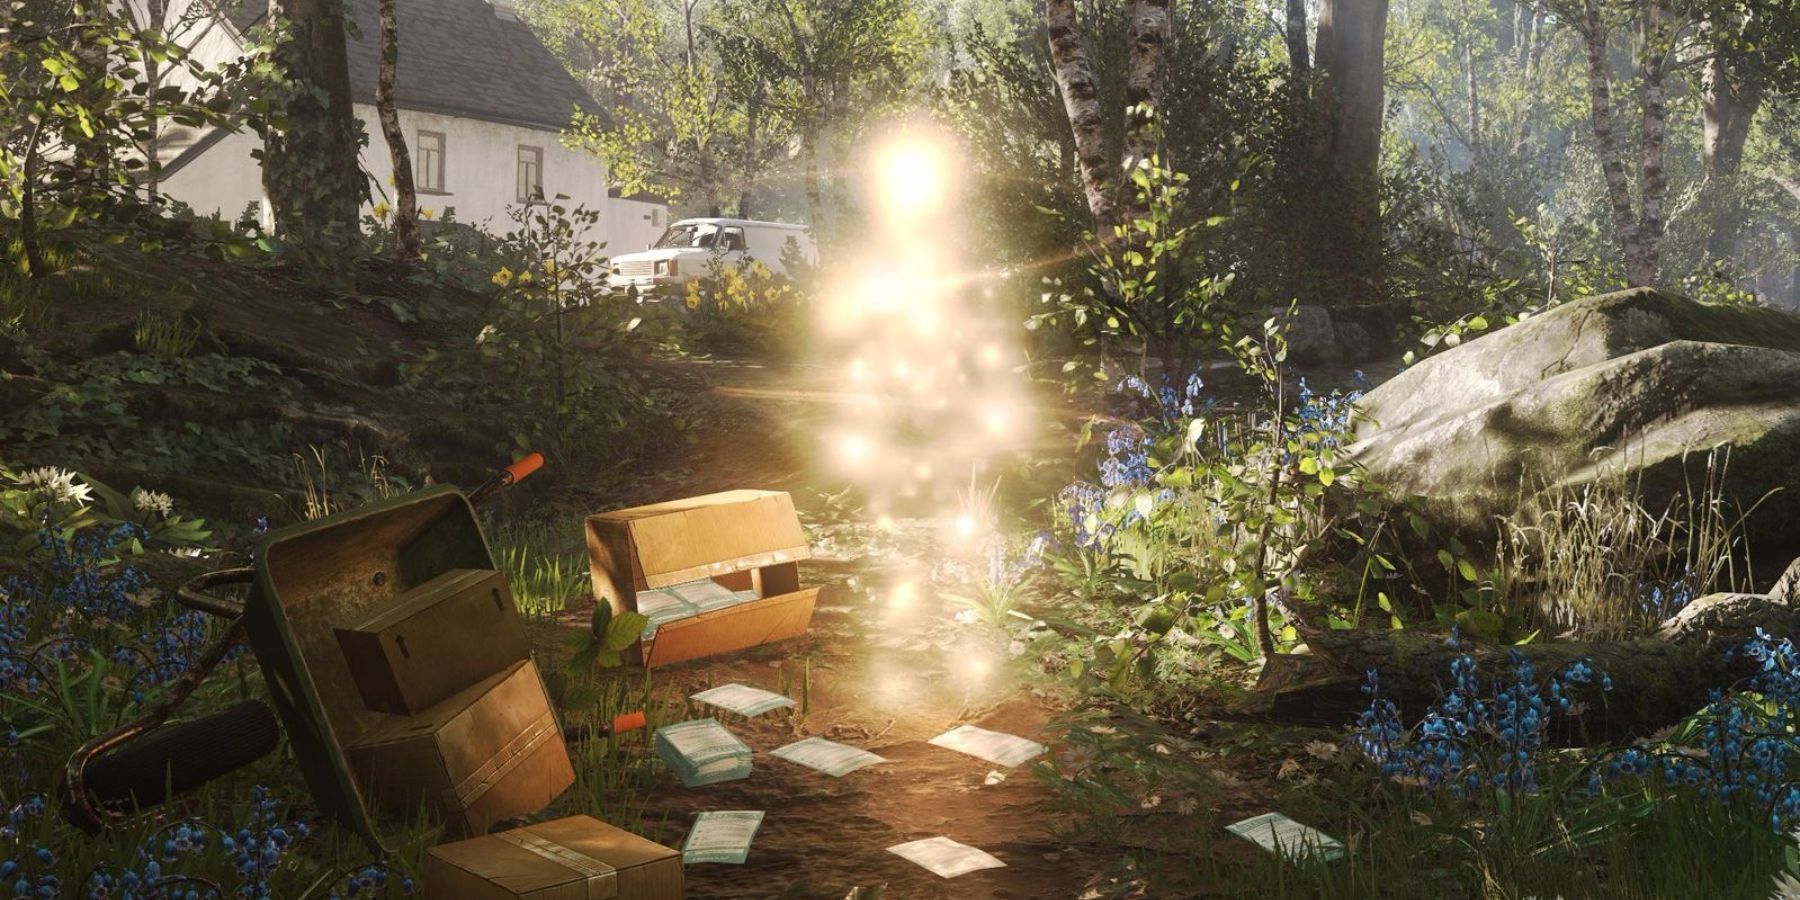 The player encountering a spirit orb in Everybody's Gone to the Rapture